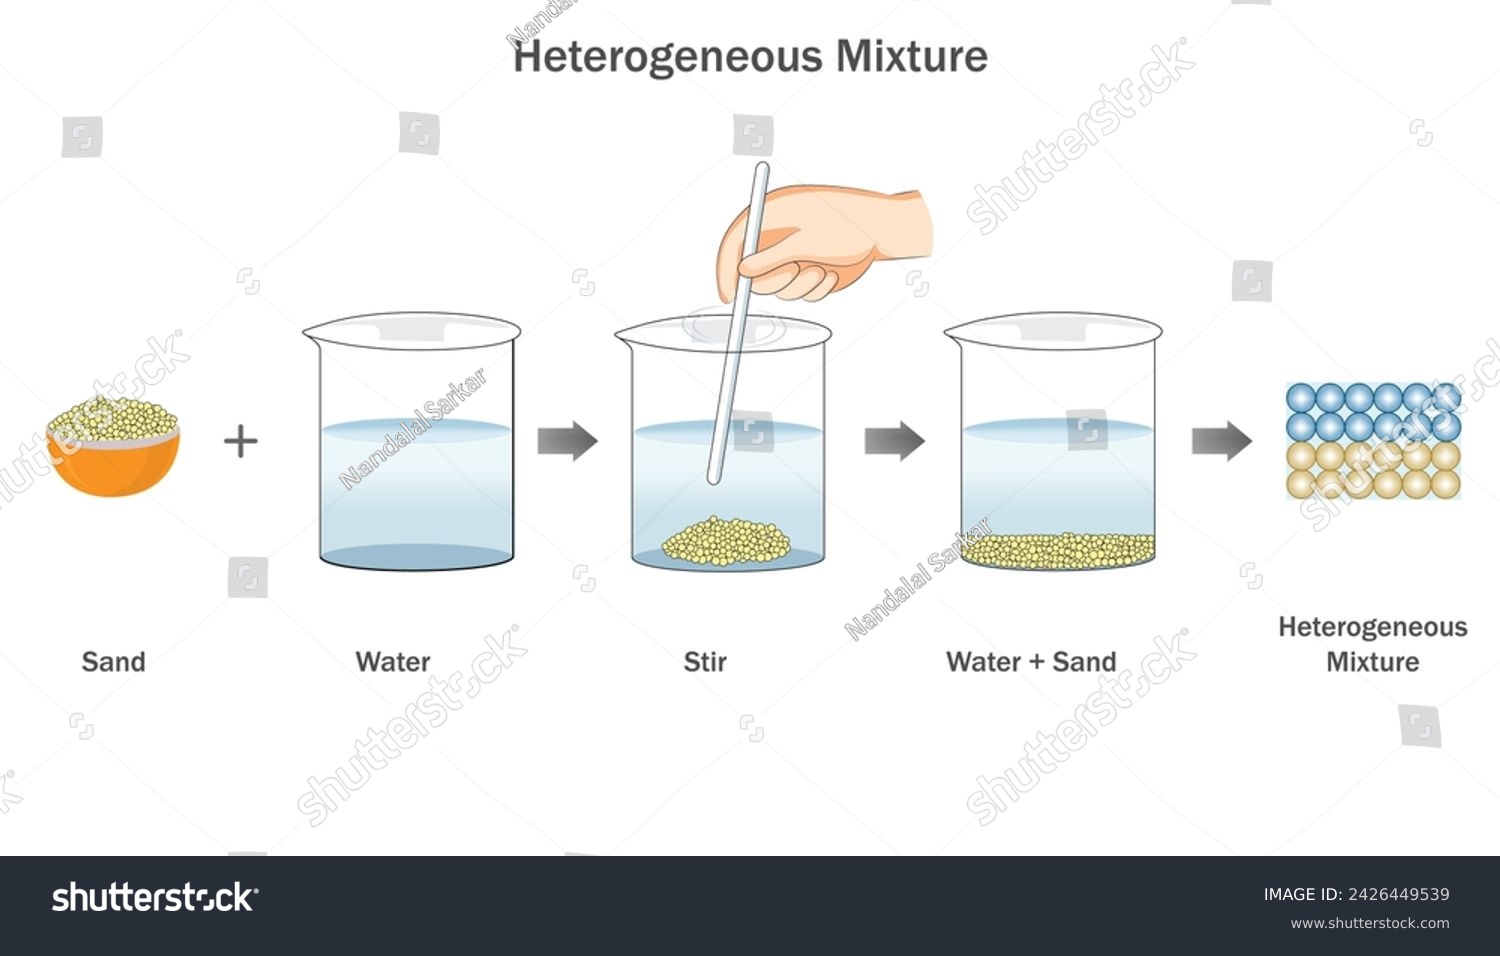 Heterogeneous mixture is Unevenly distributed substances, displaying varying compositions within the mixture. #2426449539